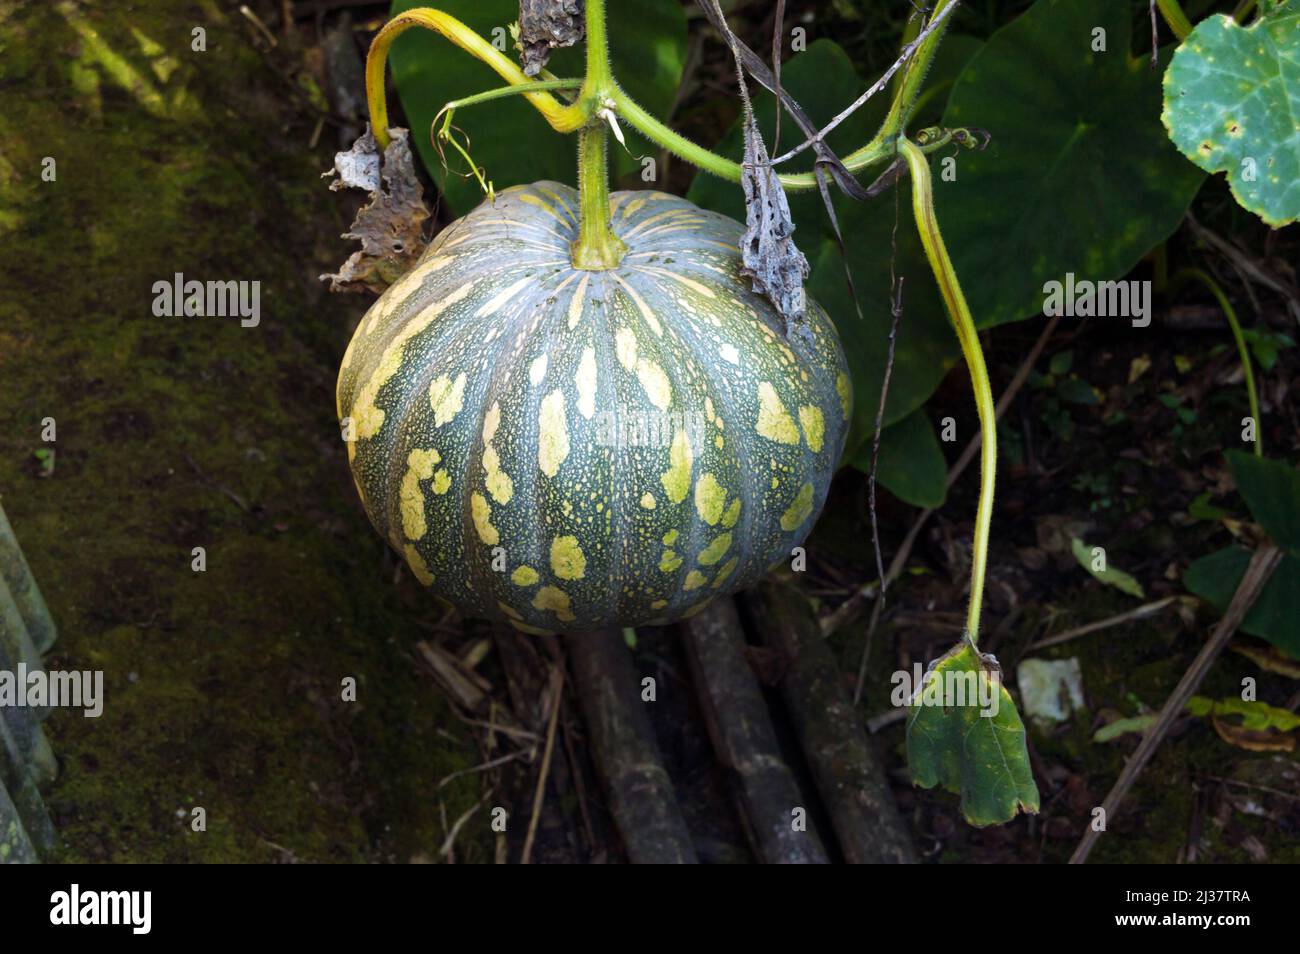 Round pumpkin suspended from the stem a few inches off the ground Stock Photo